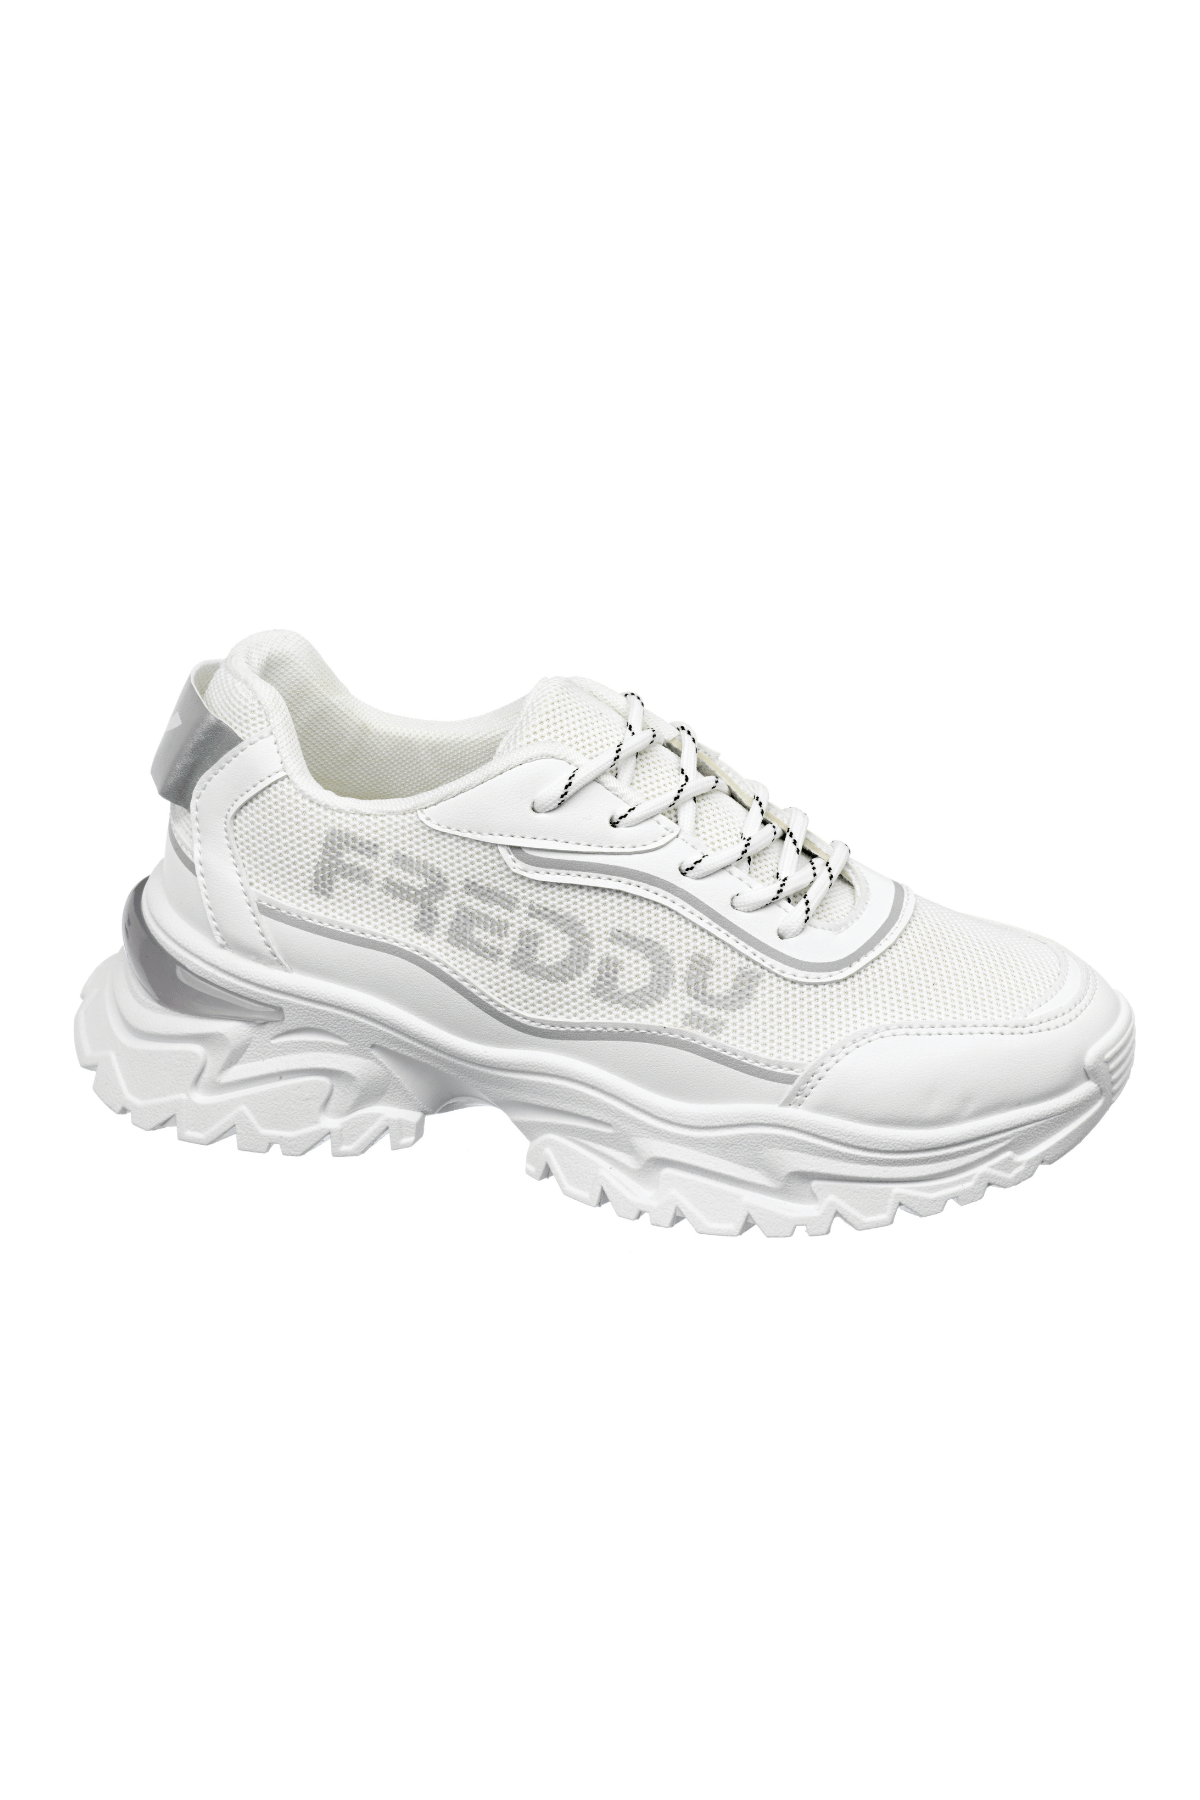 White Chunky Sole Fitness Shoe